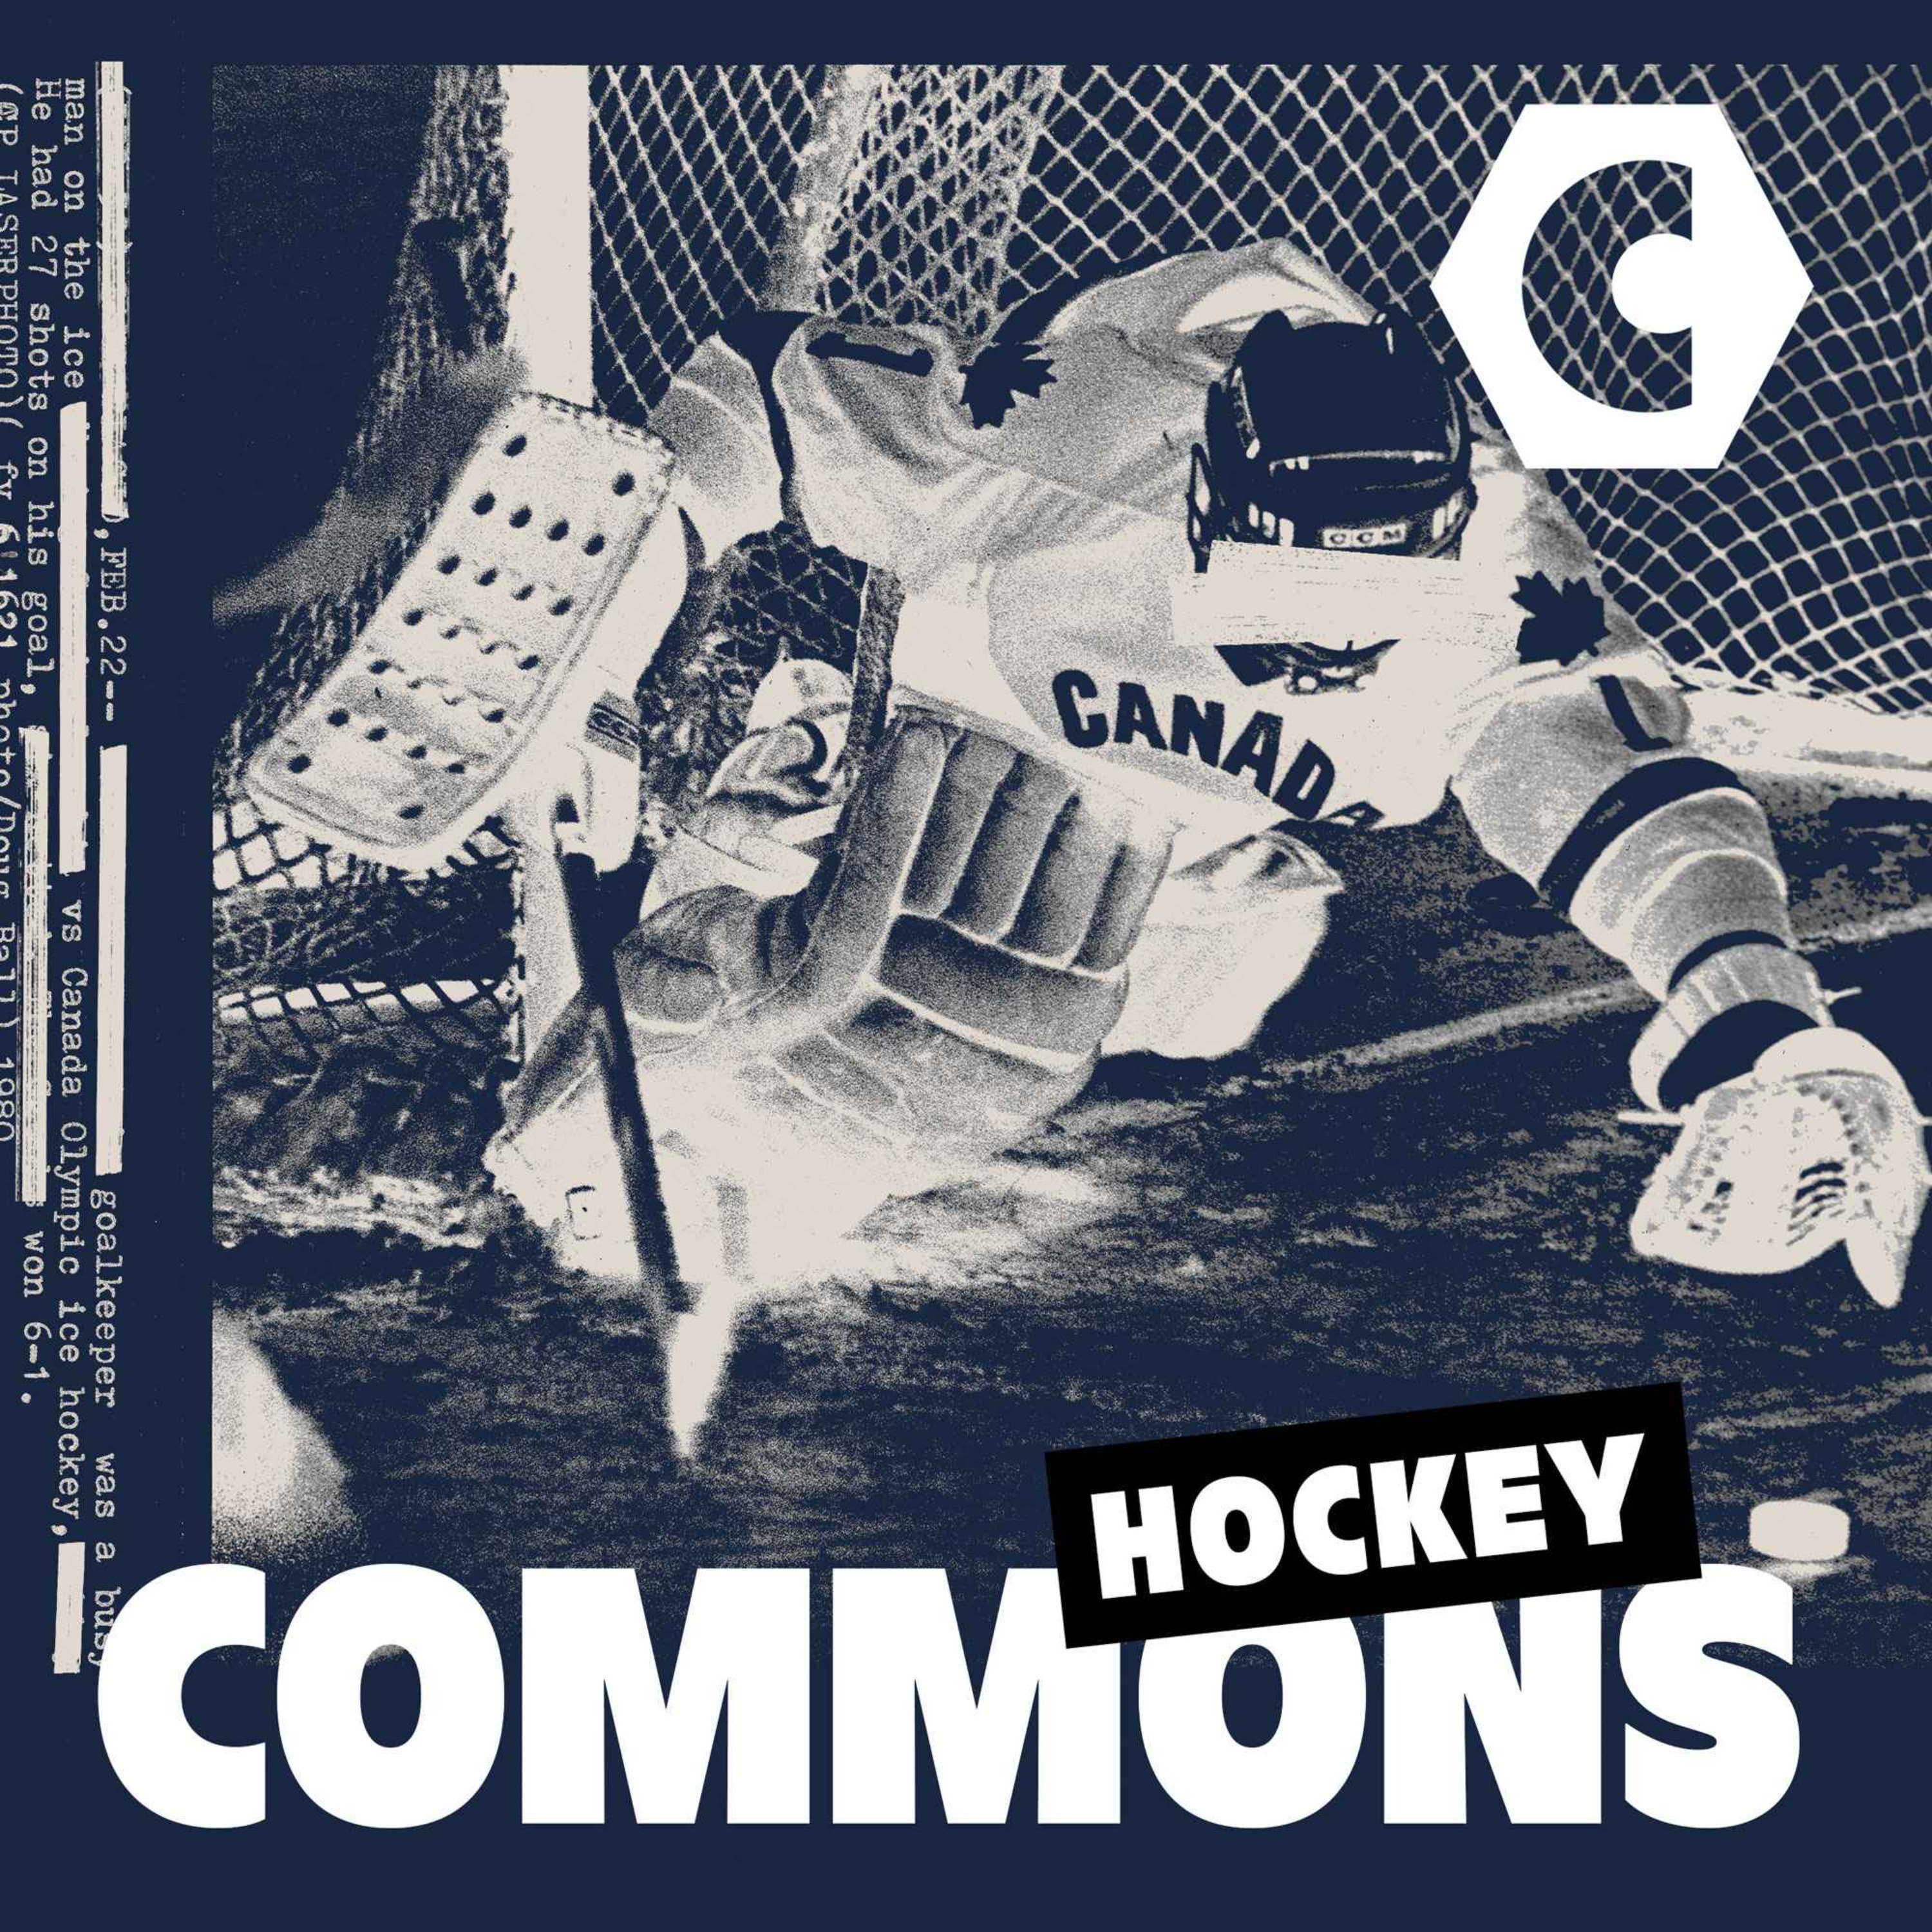 Introducing COMMONS: Hockey